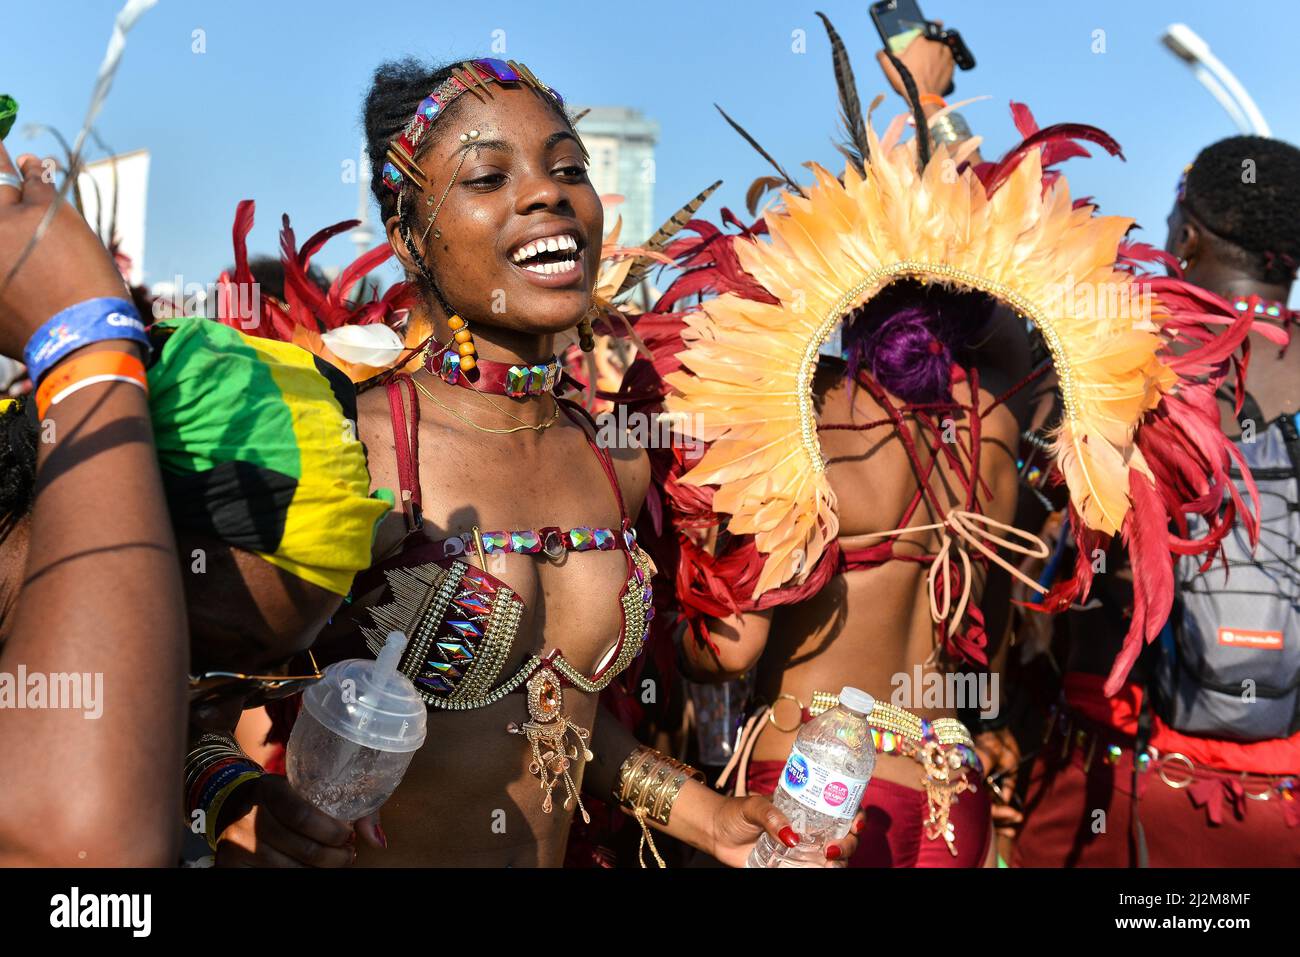 TORONTO, ON, Canada - AUGUST 04: Masqueraders take part in the Toronto Caribbean Carnival Grand Parade at Exhibition Place Stock Photo